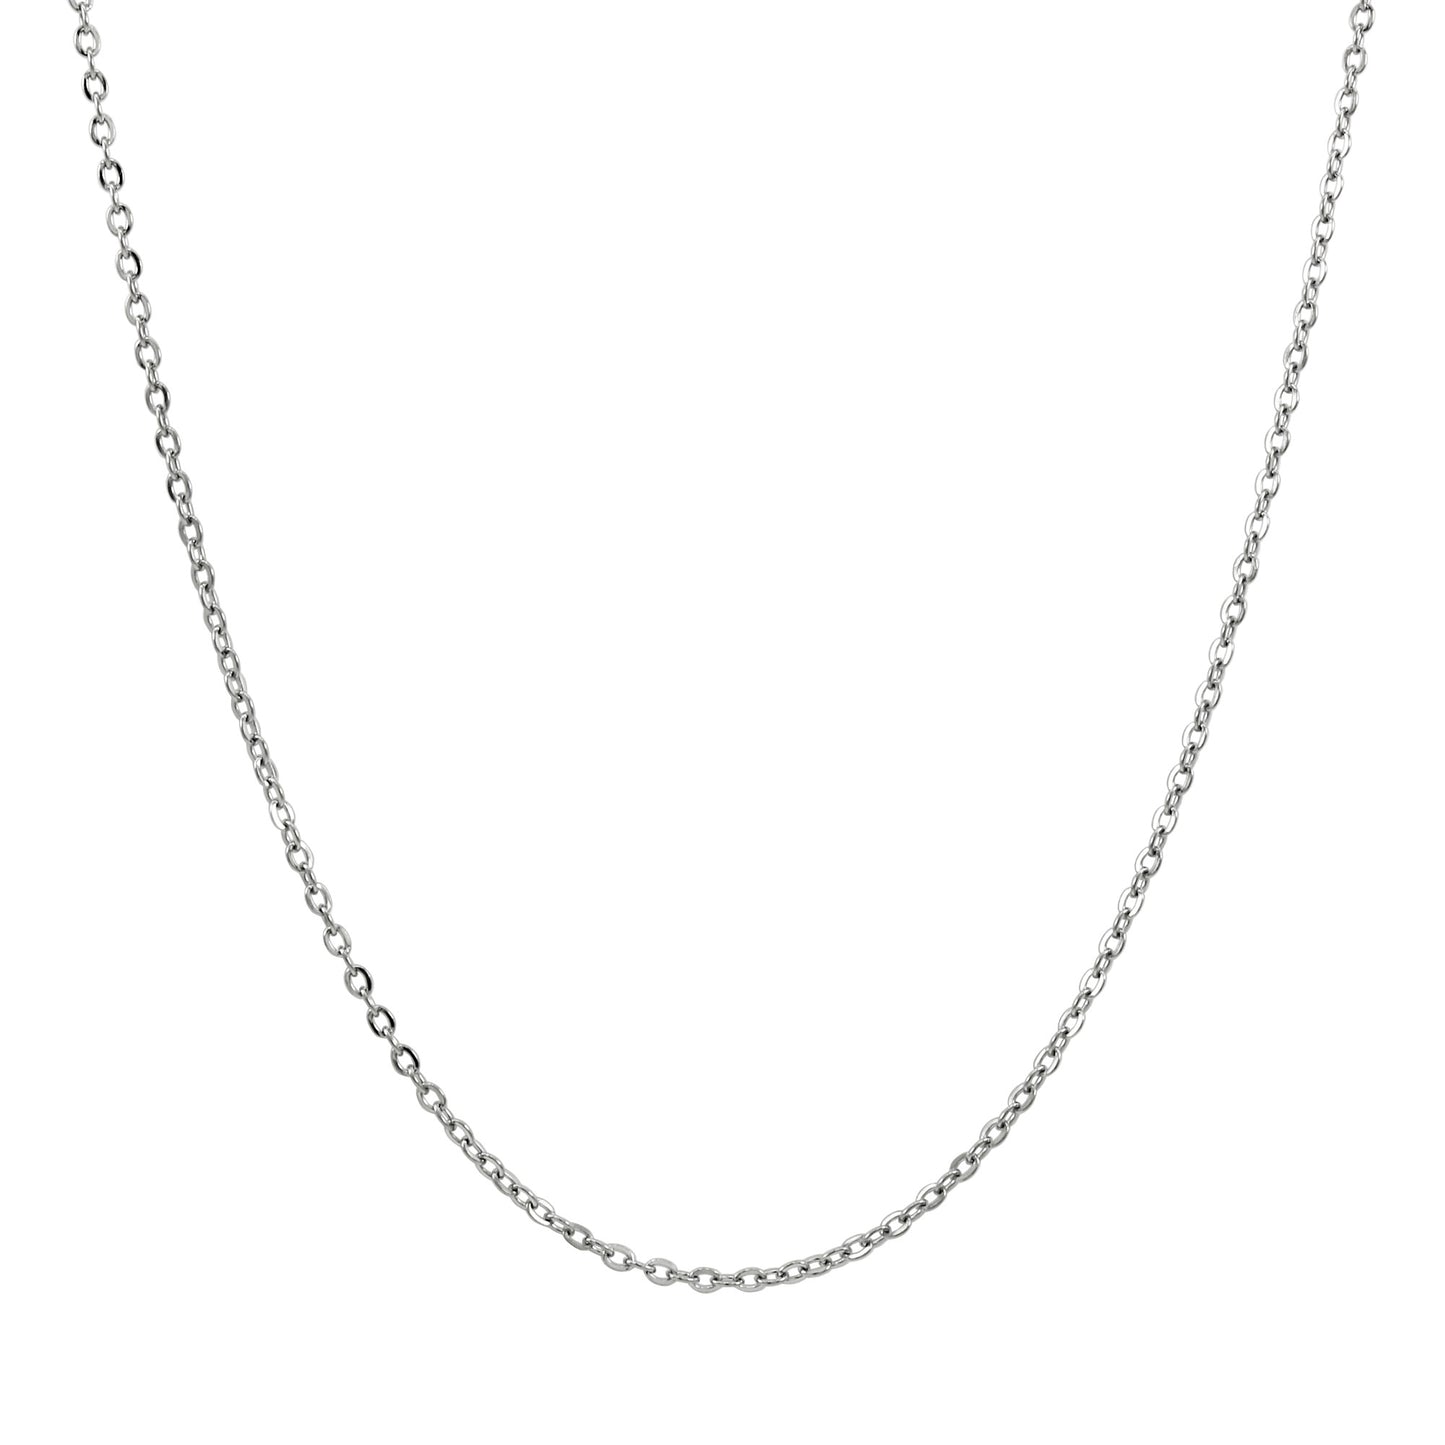 925 Sterling Silver Square Free Form Nugget Pendant With 22" Hypoallergenic Cable Chain Necklace